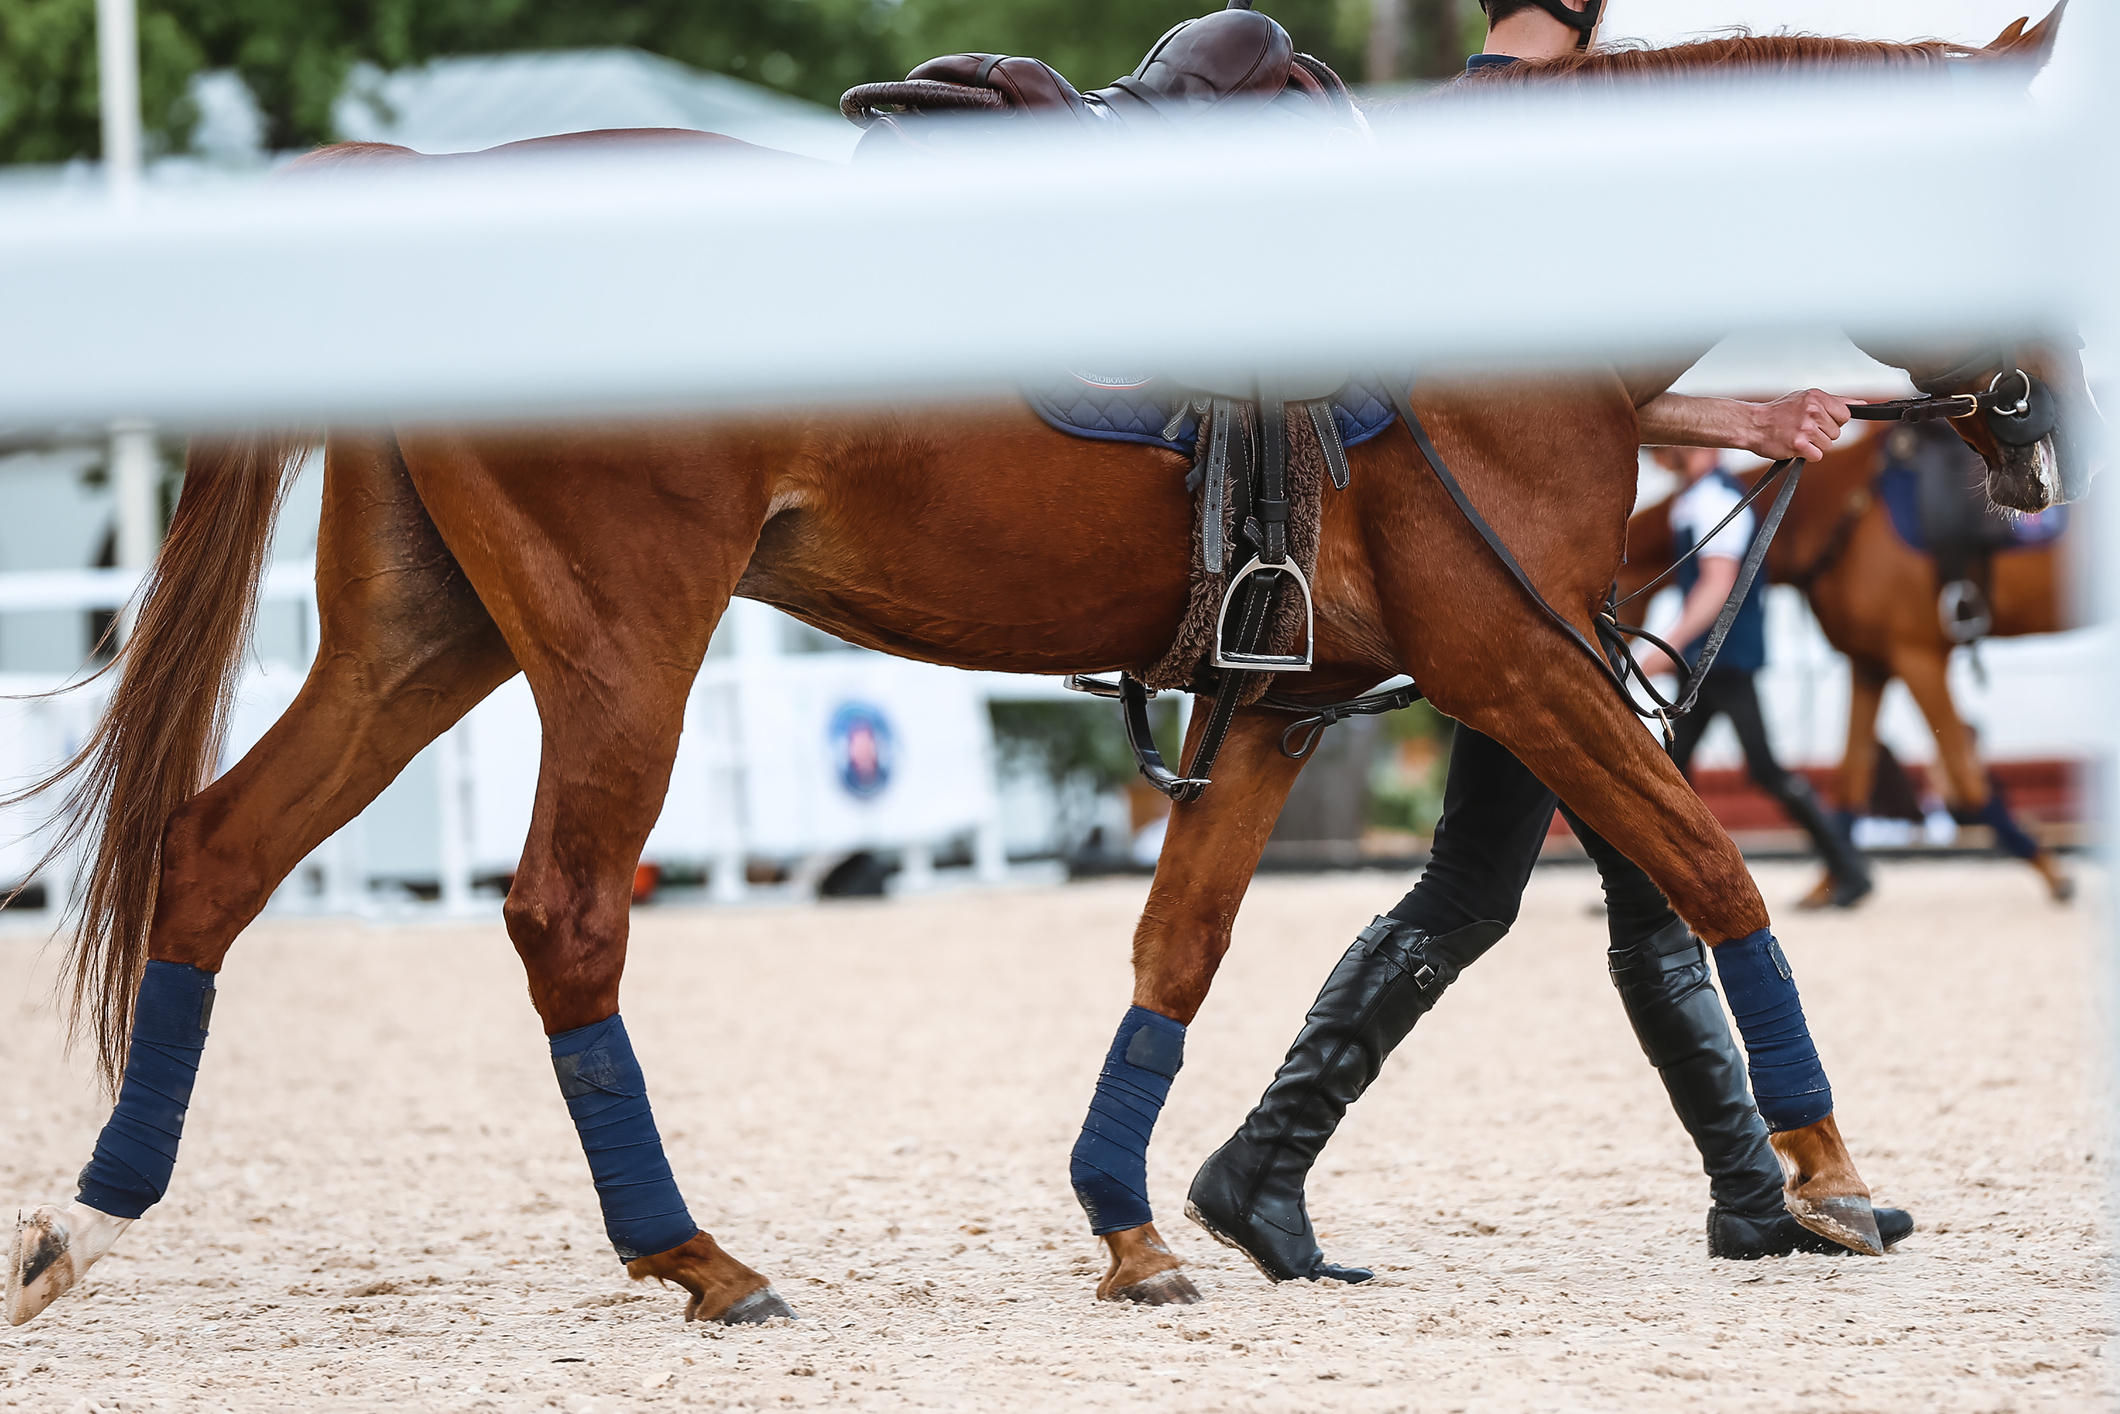 A full-body shot of af horse at a horse show, partially obstructed by a gate